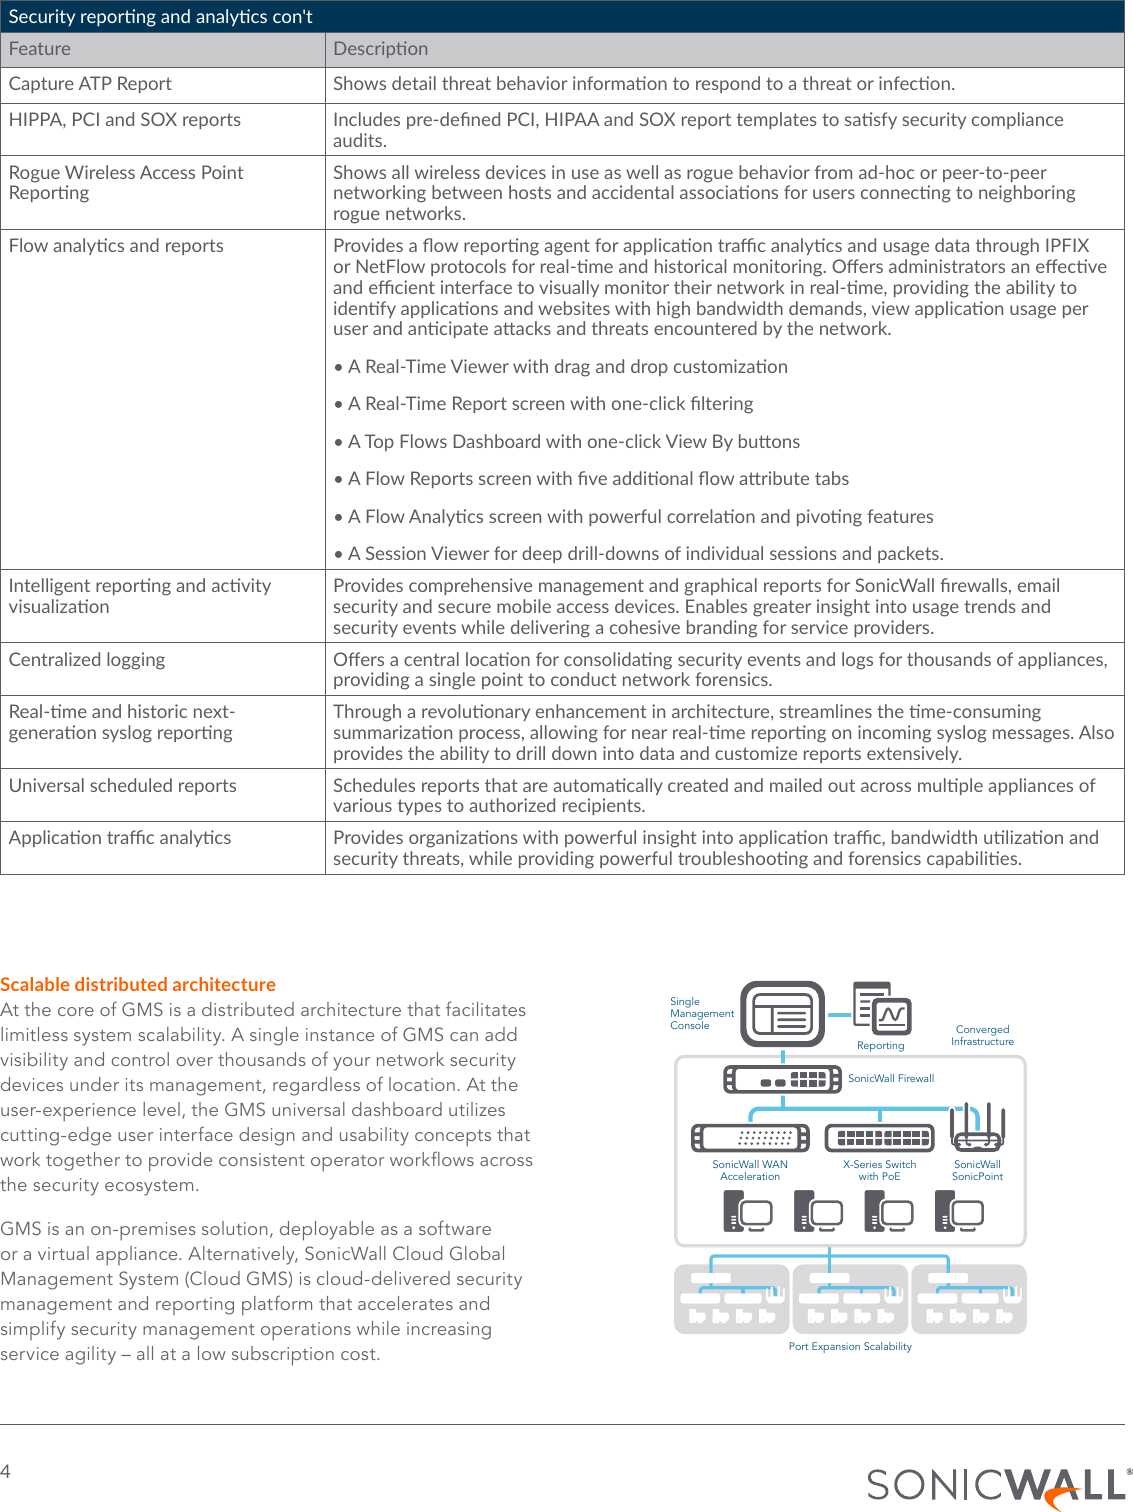 Page 4 of 9 - Global-Management-System